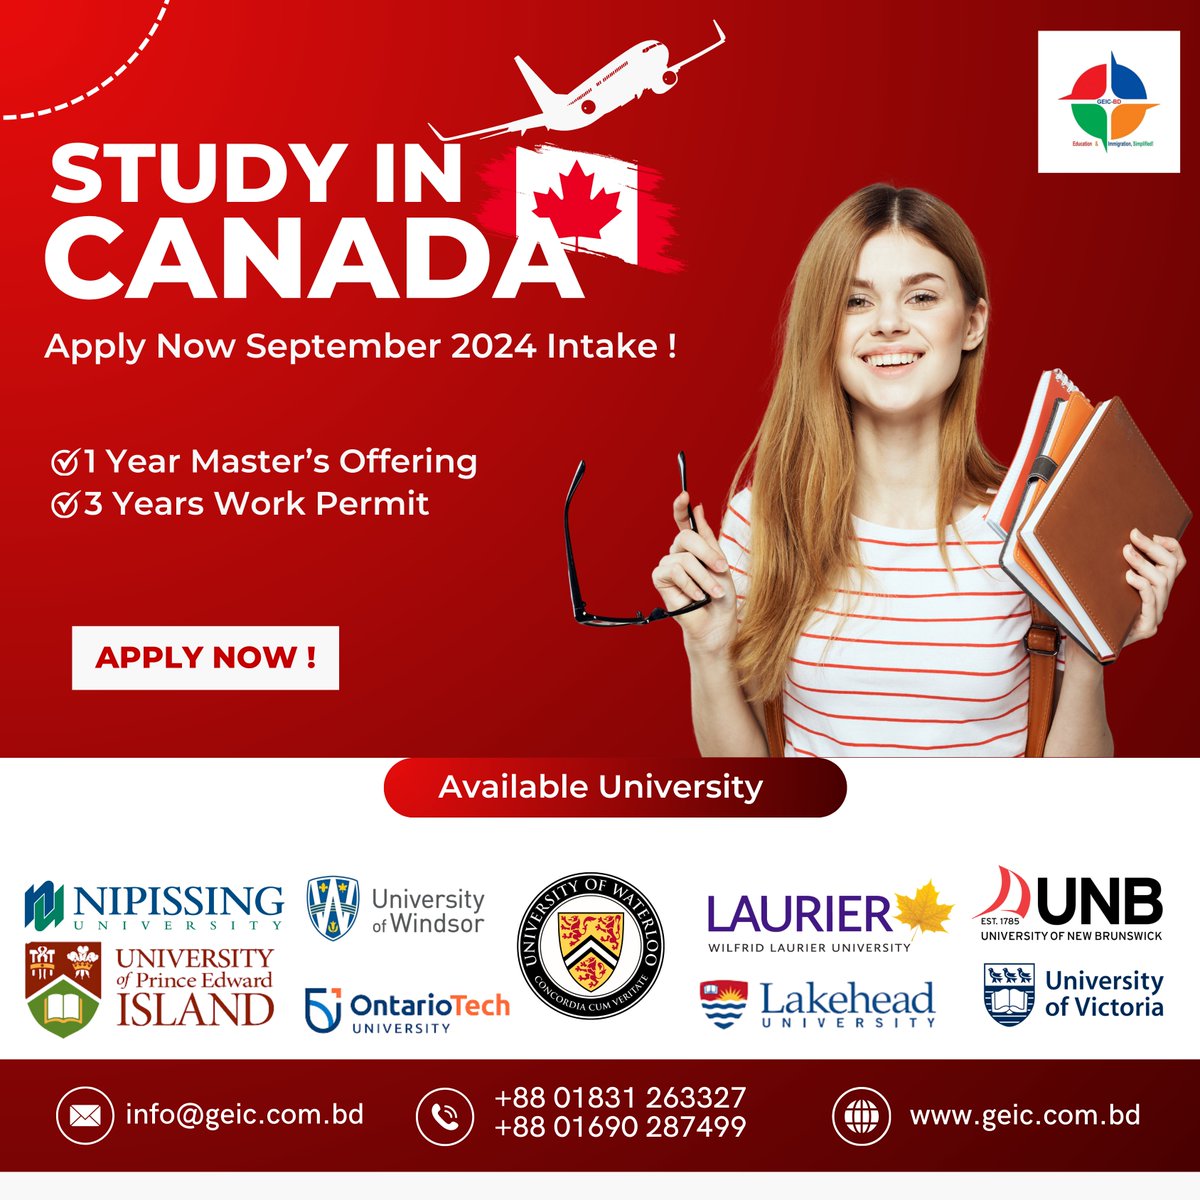 Study in Canada 1-year master’s degree program eligible for 3 years of PWS for September 2024 intake Don’t miss out on this exciting opportunity! #study #studyabroad #studyabroadlife #studymotivation #studyincanada #studyinCANADA2024 #studyincanada📷 #studyincanadanow